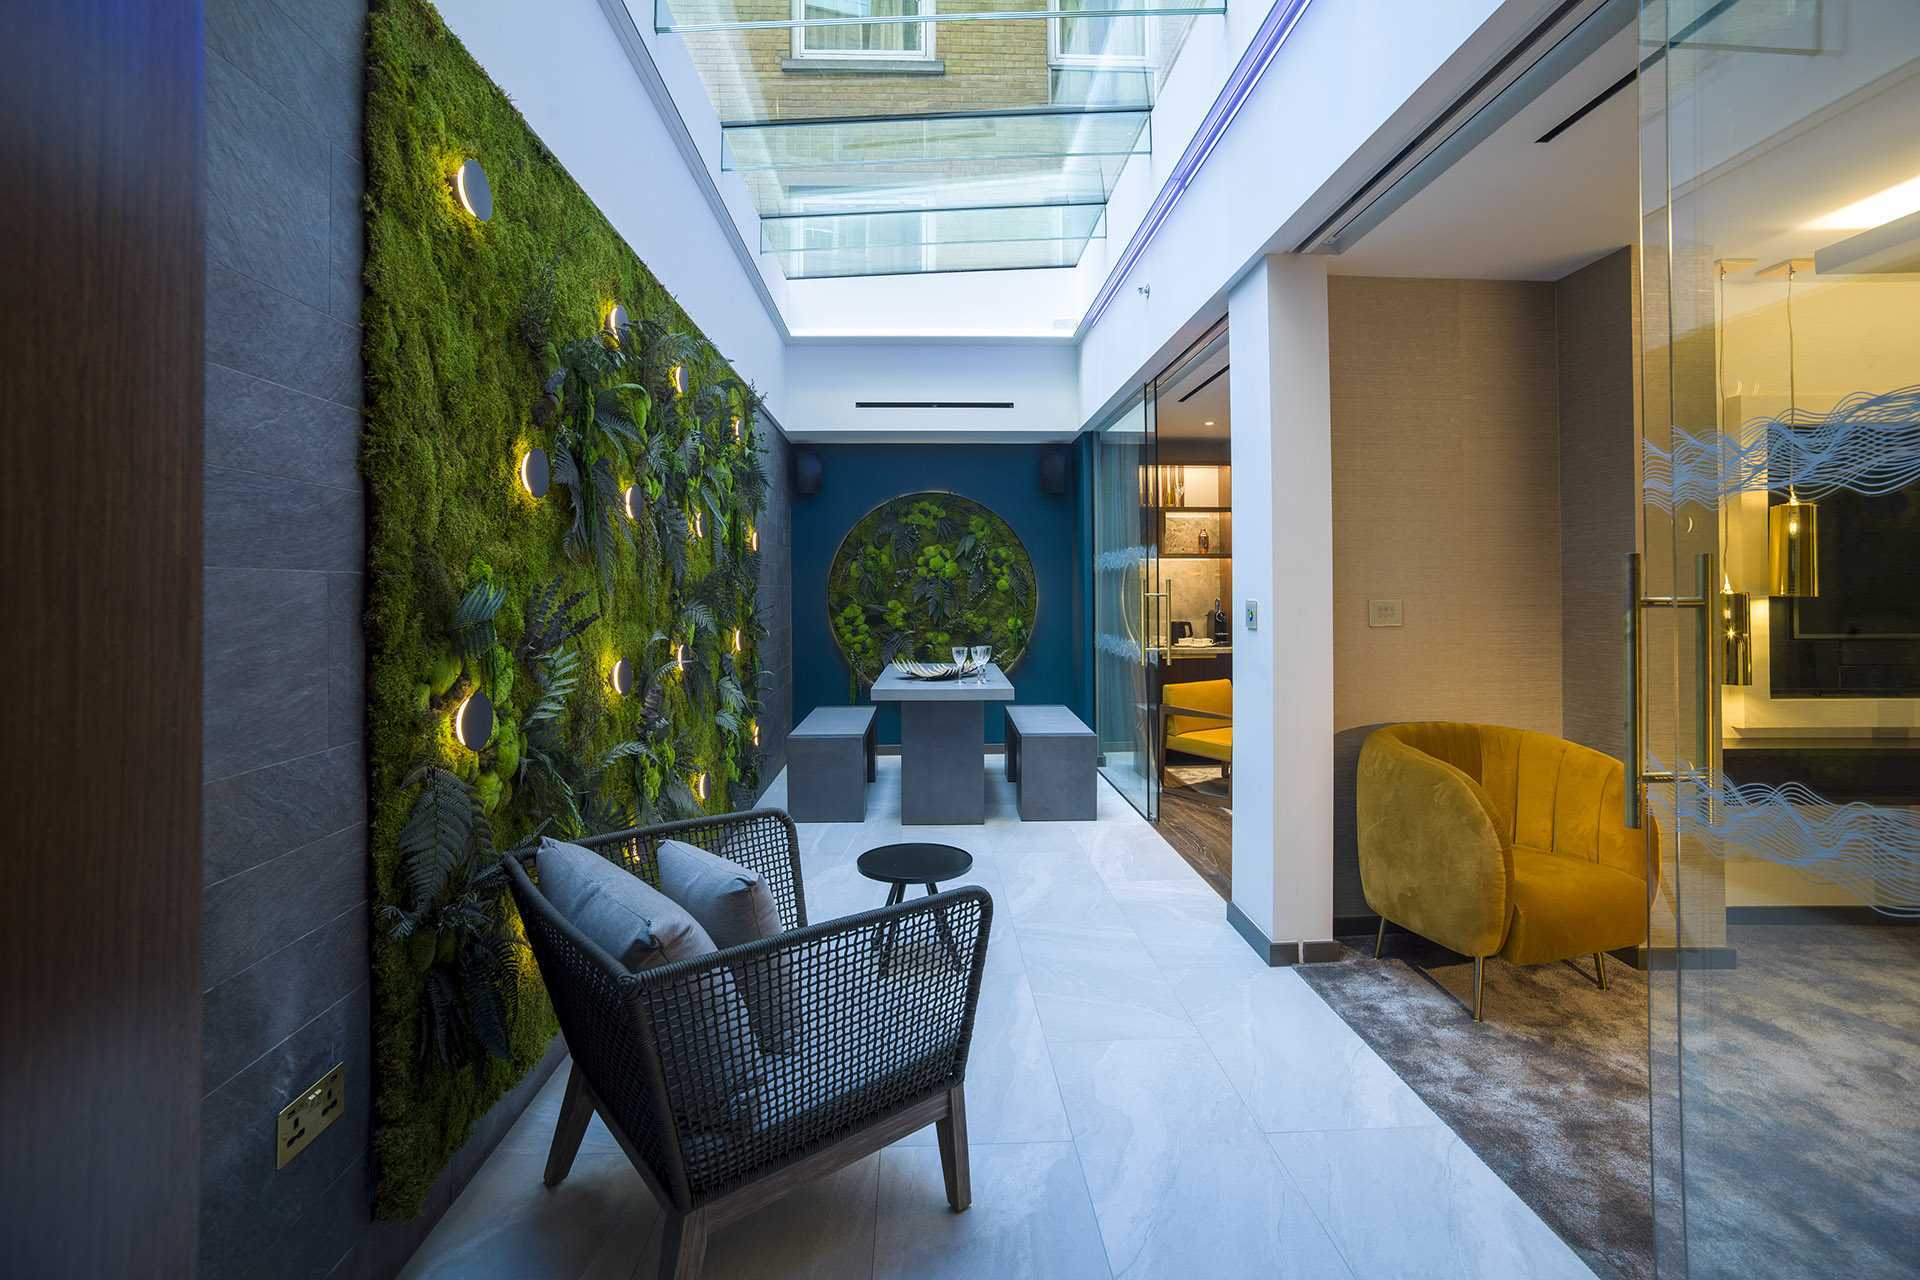 Middle Eight hotel Covent Garden suites and bedrooms